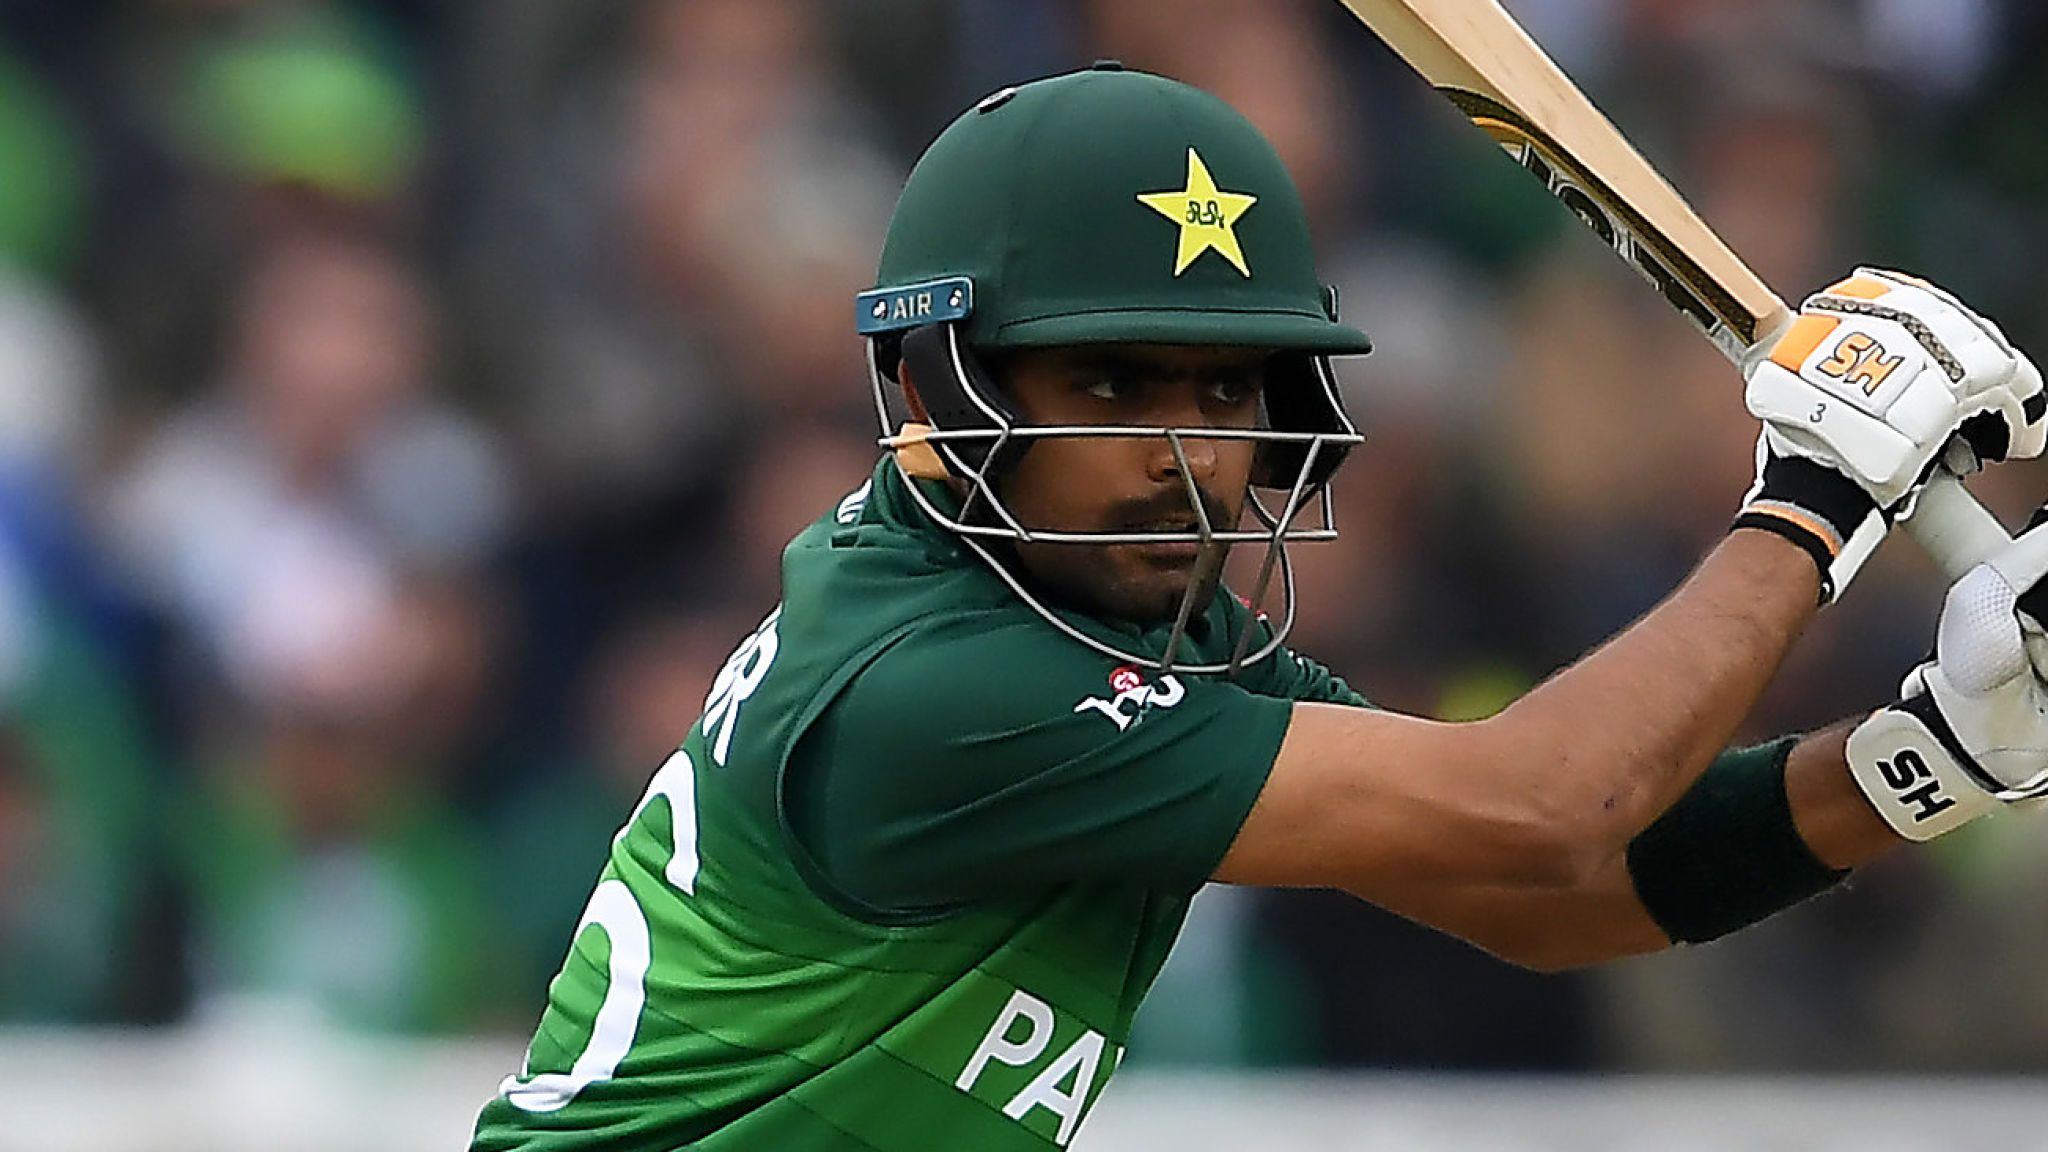 Somerset Have Signed Pakistan S Babar Azam For This - One Day International  - 2048x1152 Wallpaper 